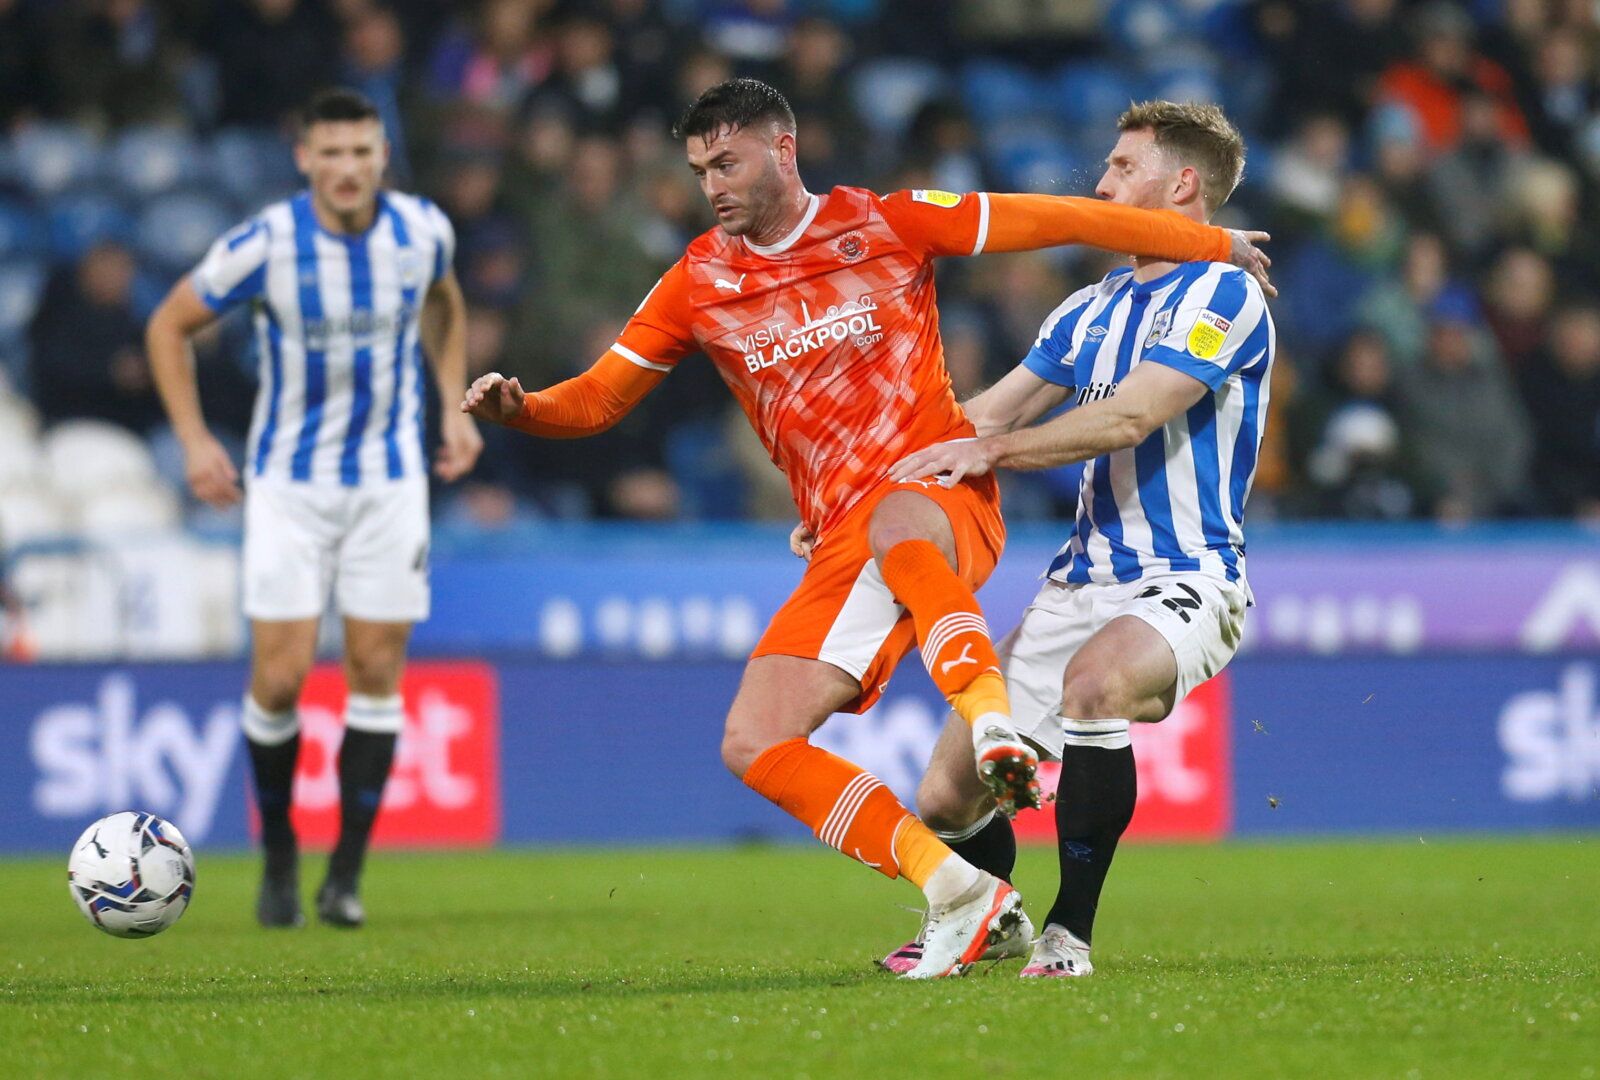 Soccer Football - Championship - Huddersfield Town v Blackpool - John Smith's Stadium, Huddersfield, Britain - December 26, 2021 Blackpool's Gary Madine in action with Huddersfield Town's Tom Lees   Action Images via Reuters/Ed Sykes  EDITORIAL USE ONLY. No use with unauthorized audio, video, data, fixture lists, club/league logos or 